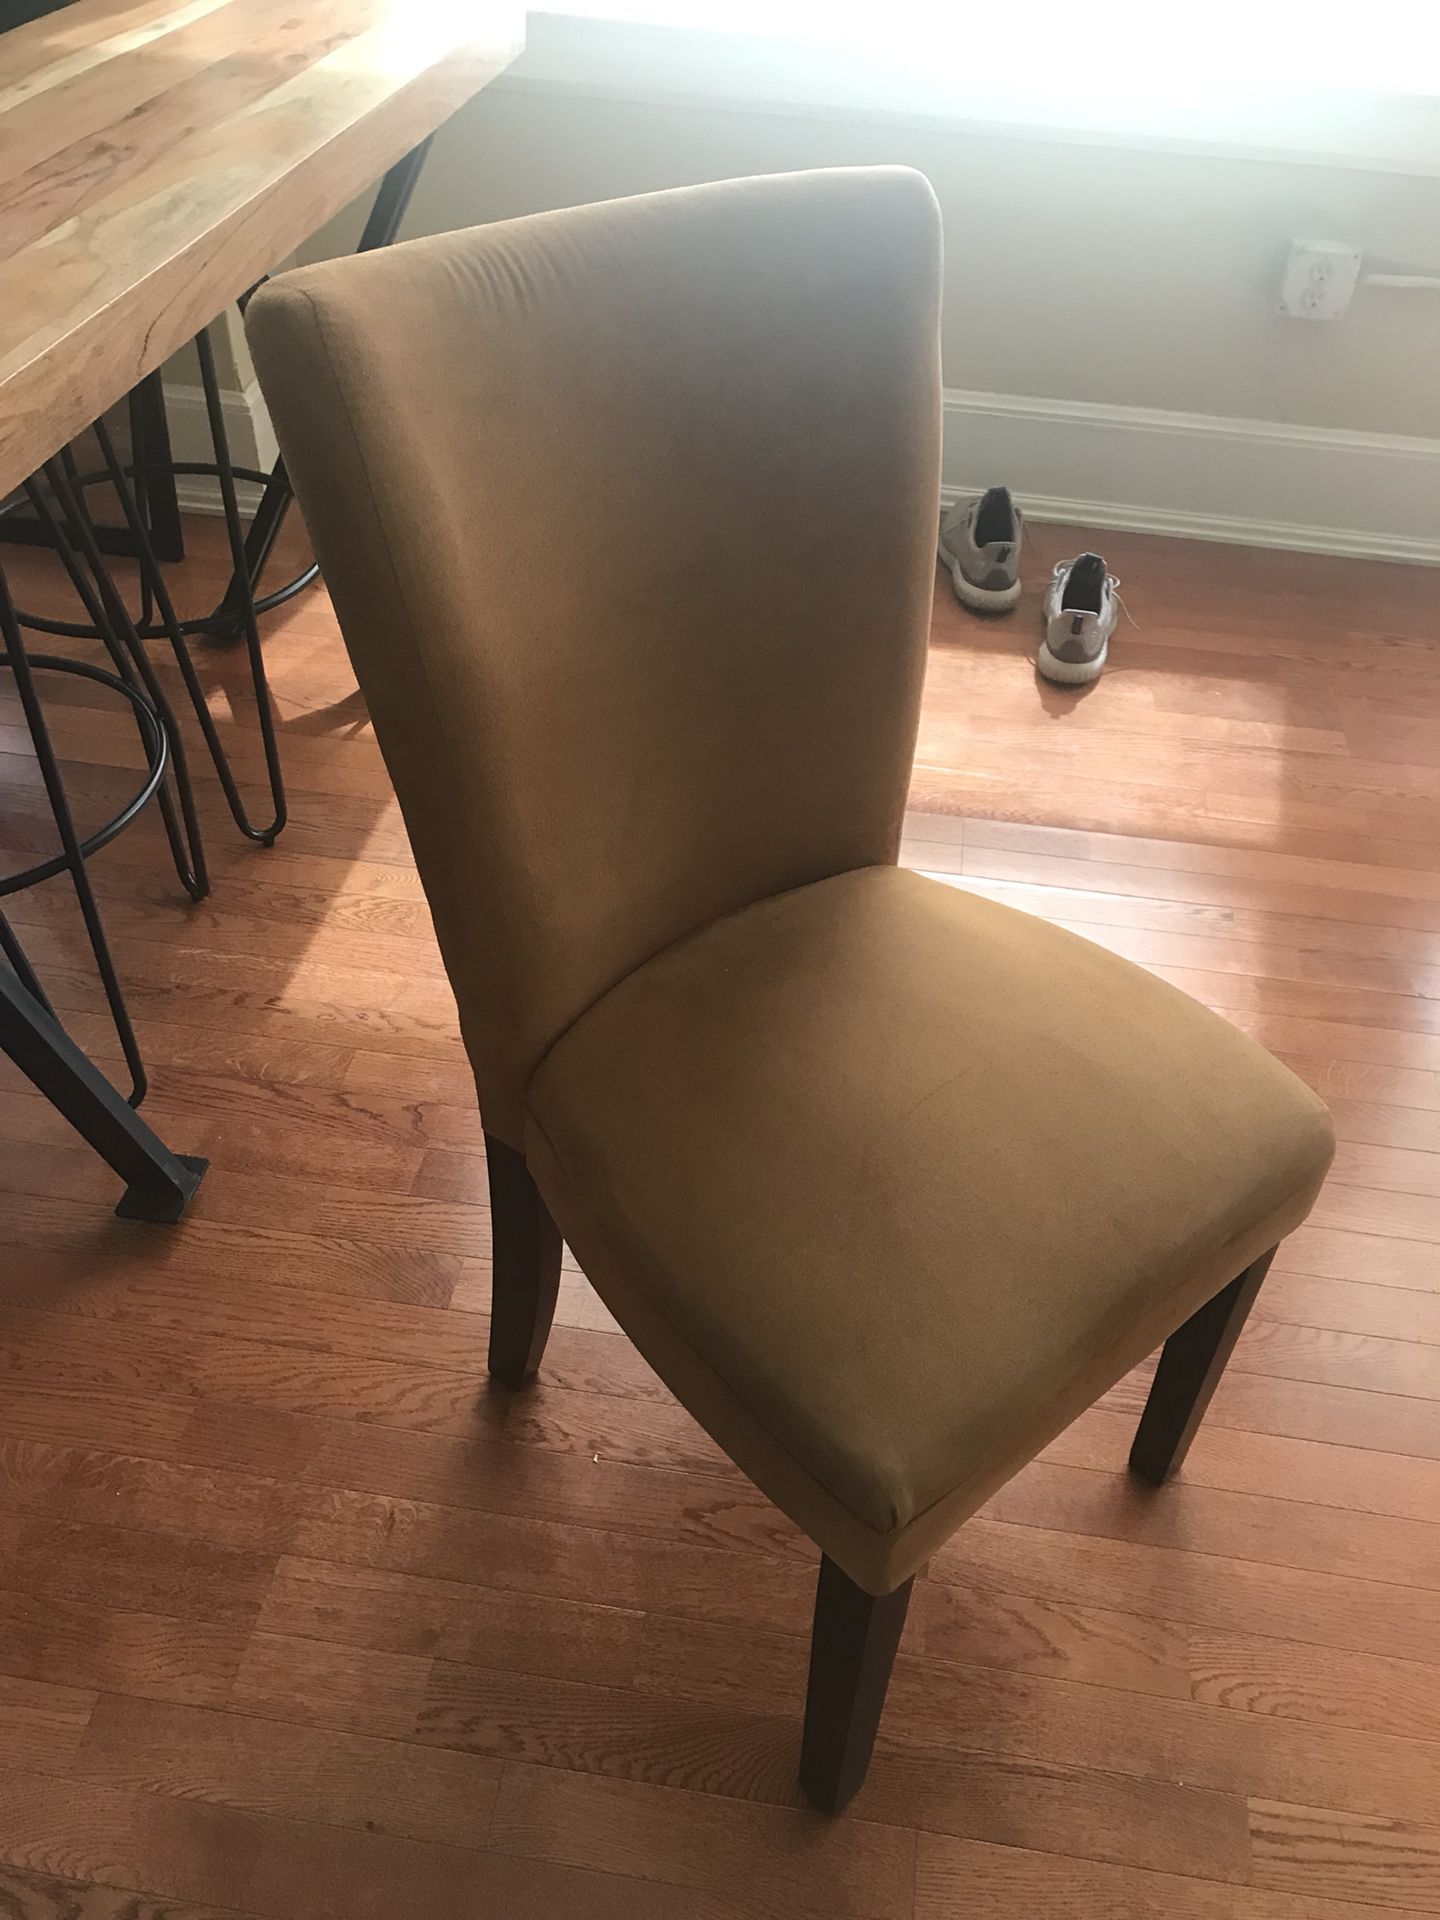 Chair for sale! Great for a desk or accent chair